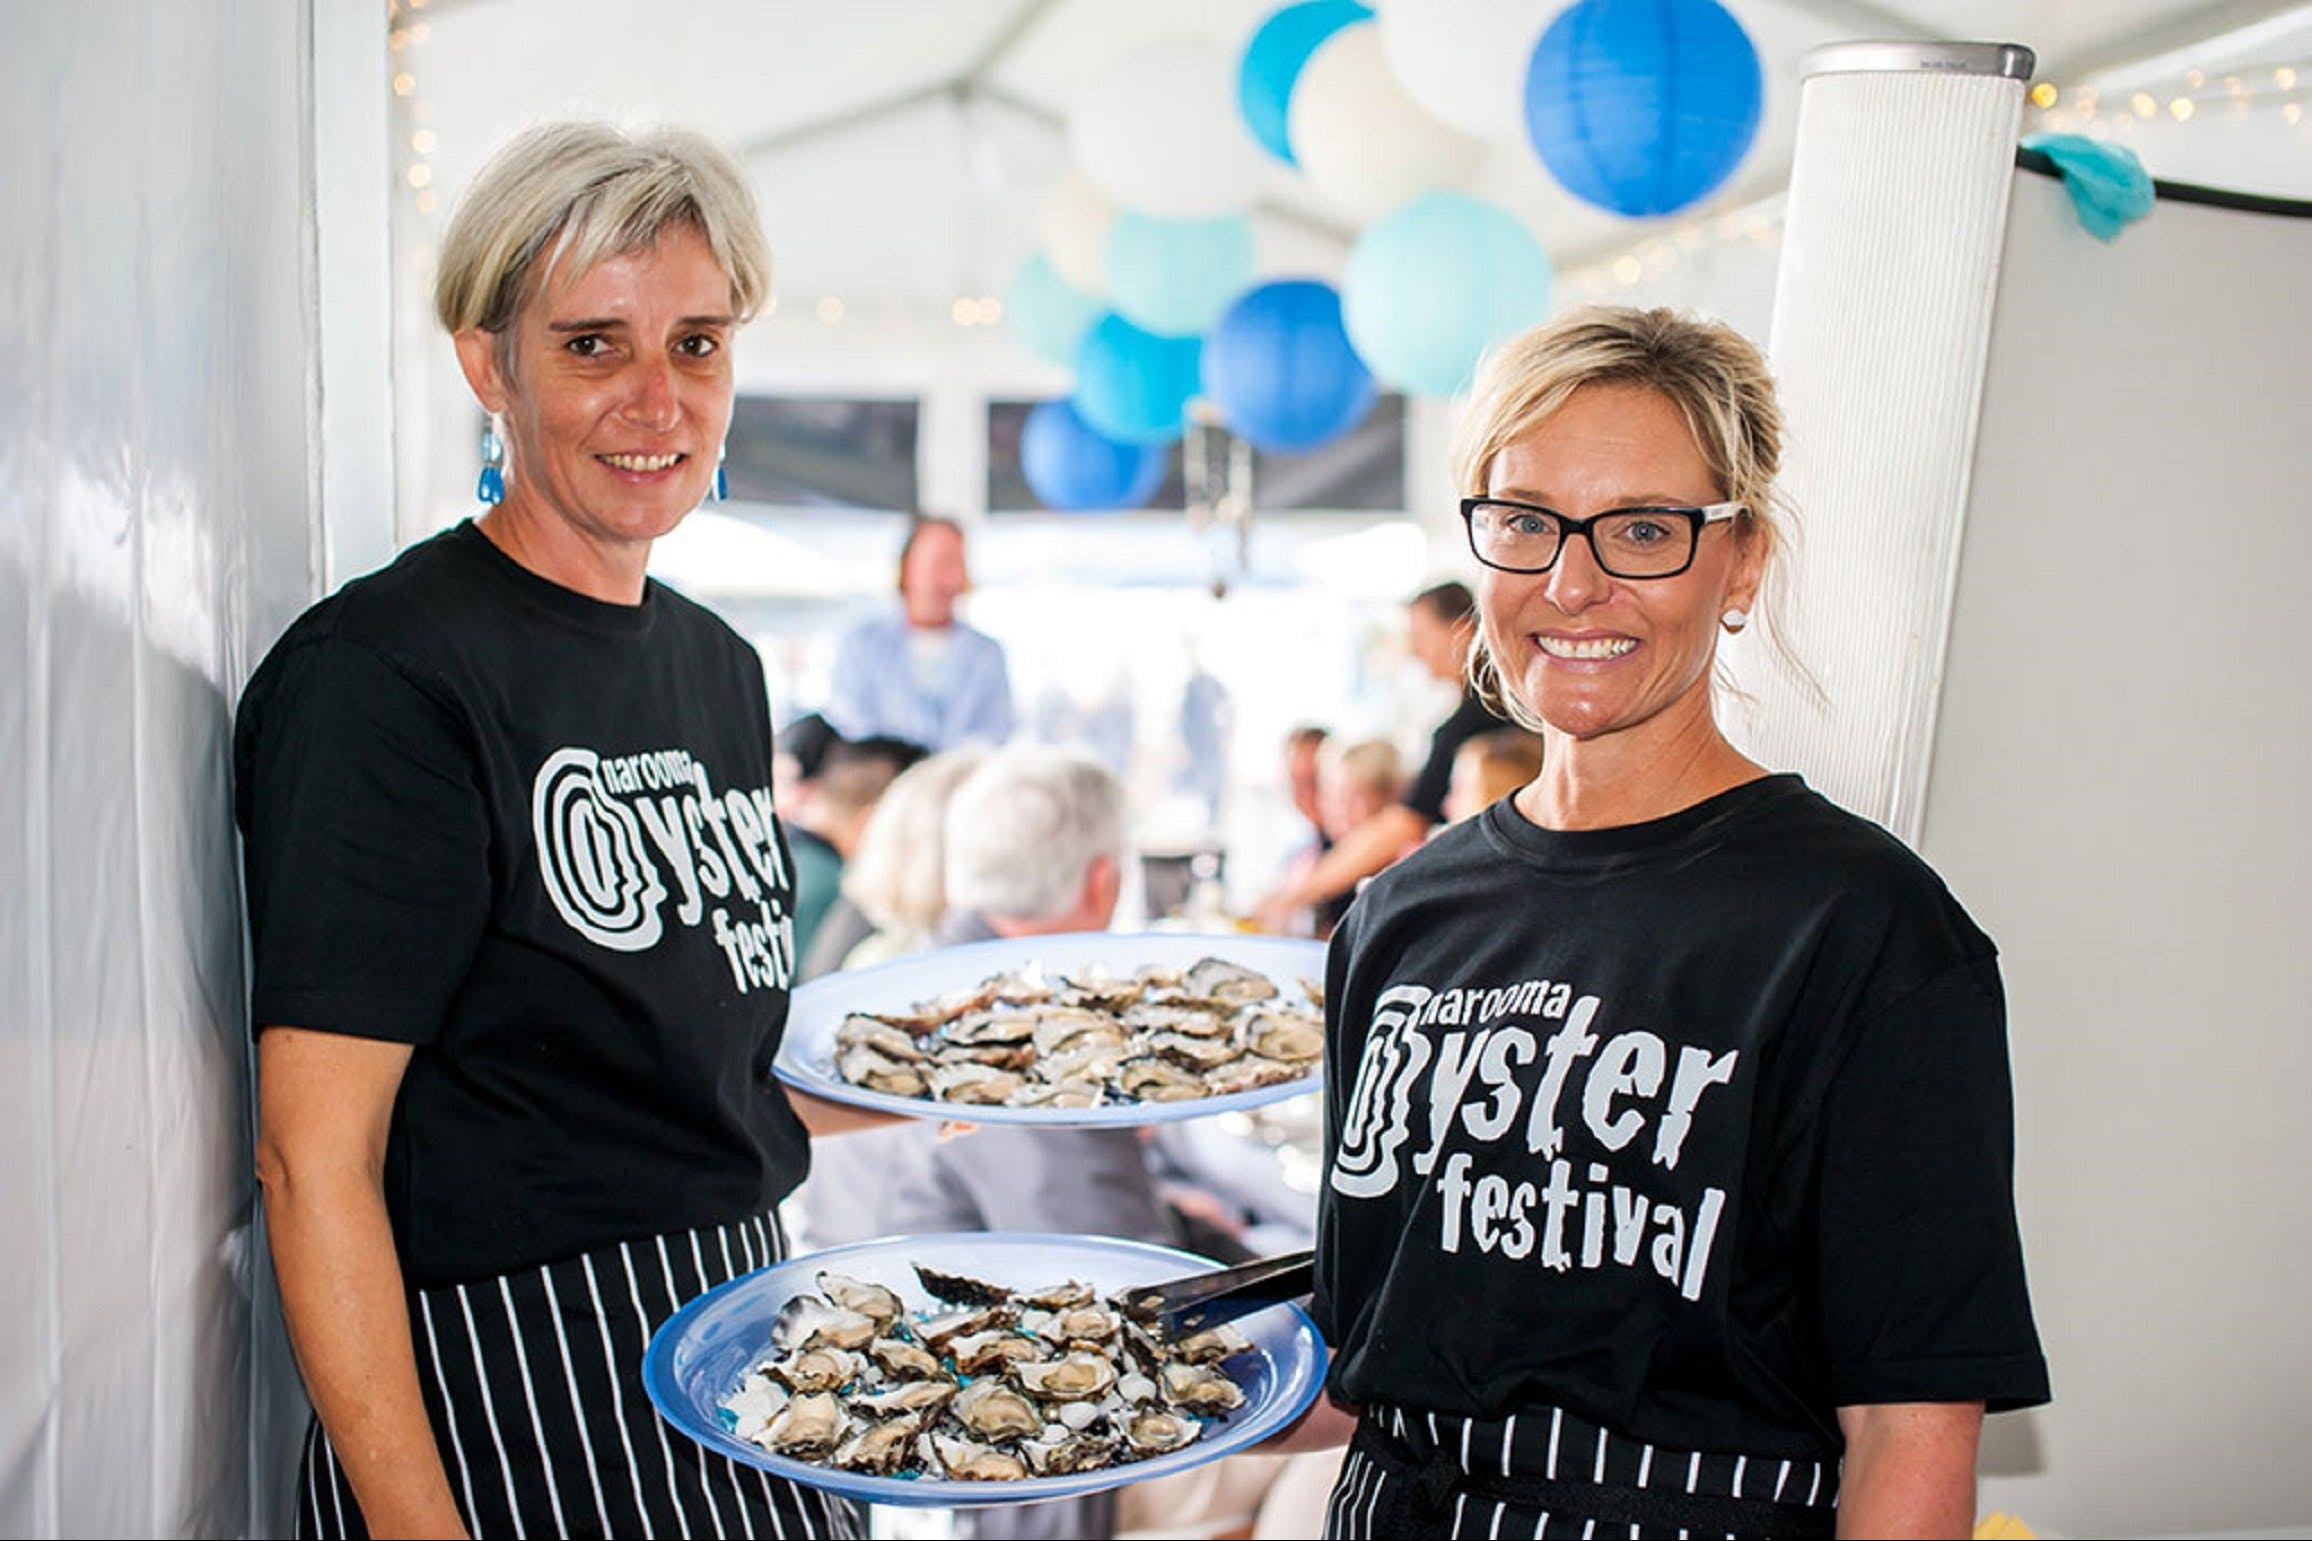 Narooma Oyster Festival - Tourism Canberra